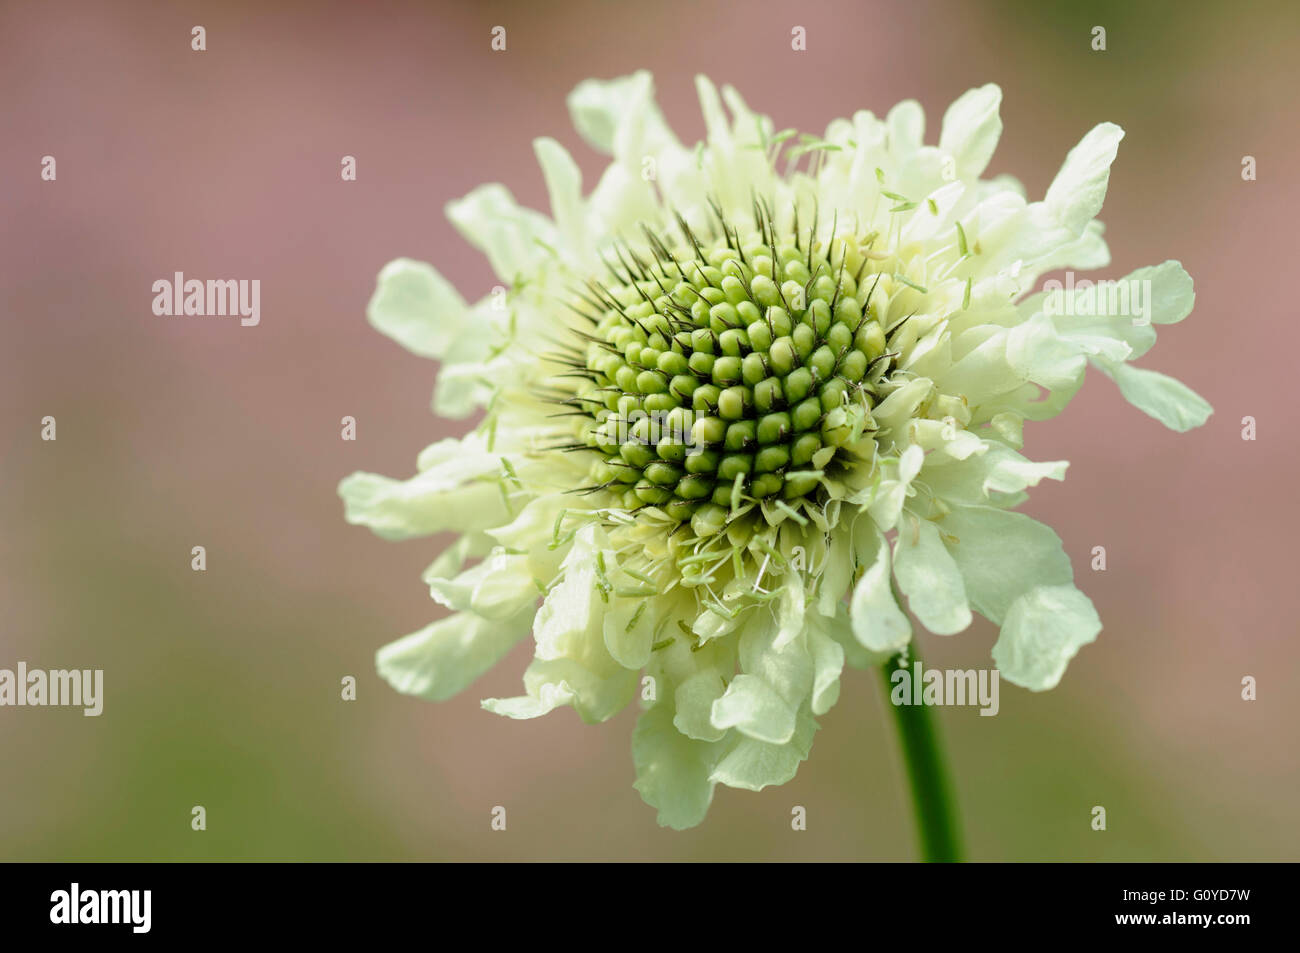 Scabious, Yellow scabious, Cephalaria, Cephalaria gigantea, Asia indigenous, Beauty in Nature, Colour, Creative, Europe indigenous, Flower, Summer Flowering, Frost hardy, Growing, Outdoor, Pastel Colour, Perennial, Plant, Stamen, Wild flower, White, Stock Photo